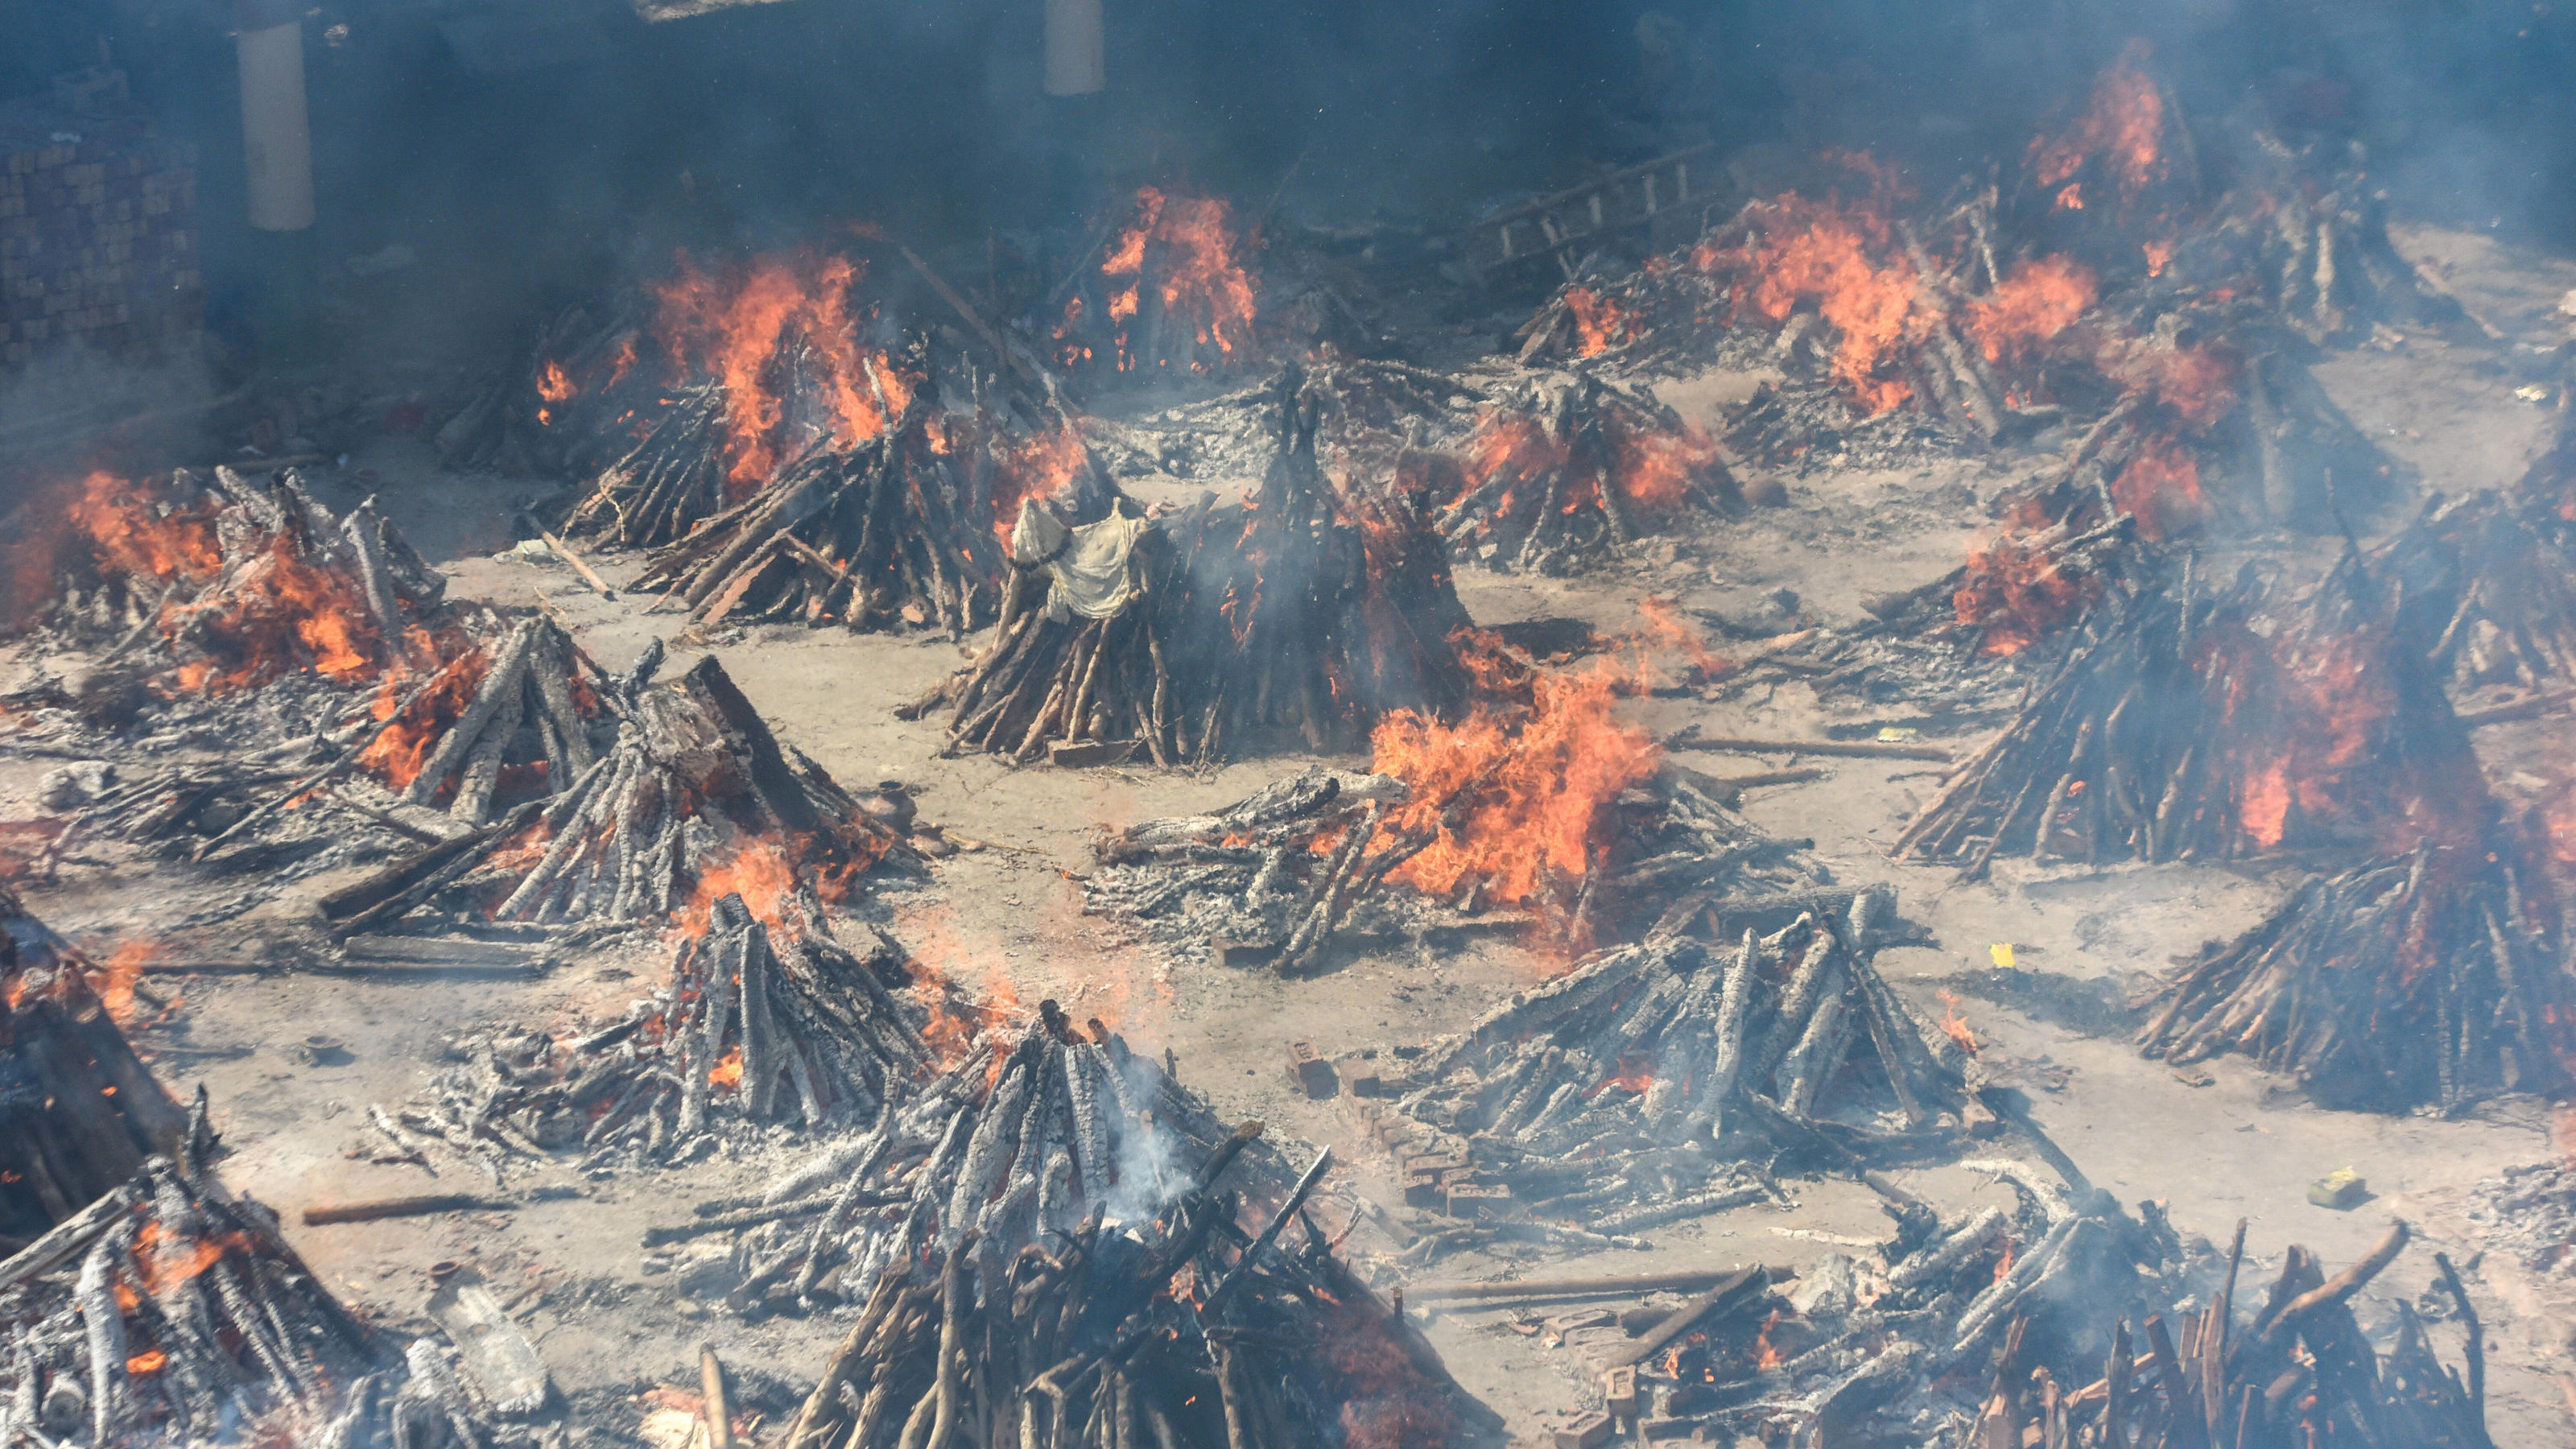  NEW DELHI, INDIA APRIL 24: Multiple funeral pyres of people who died of Covid-19 burning simultaneously at Gazipur crematorium on April 24, 2021 in New Delhi, India. Photo by Amal KS/Hindustan Times  Covid Death Toll Continues To Rise In India PUBLI